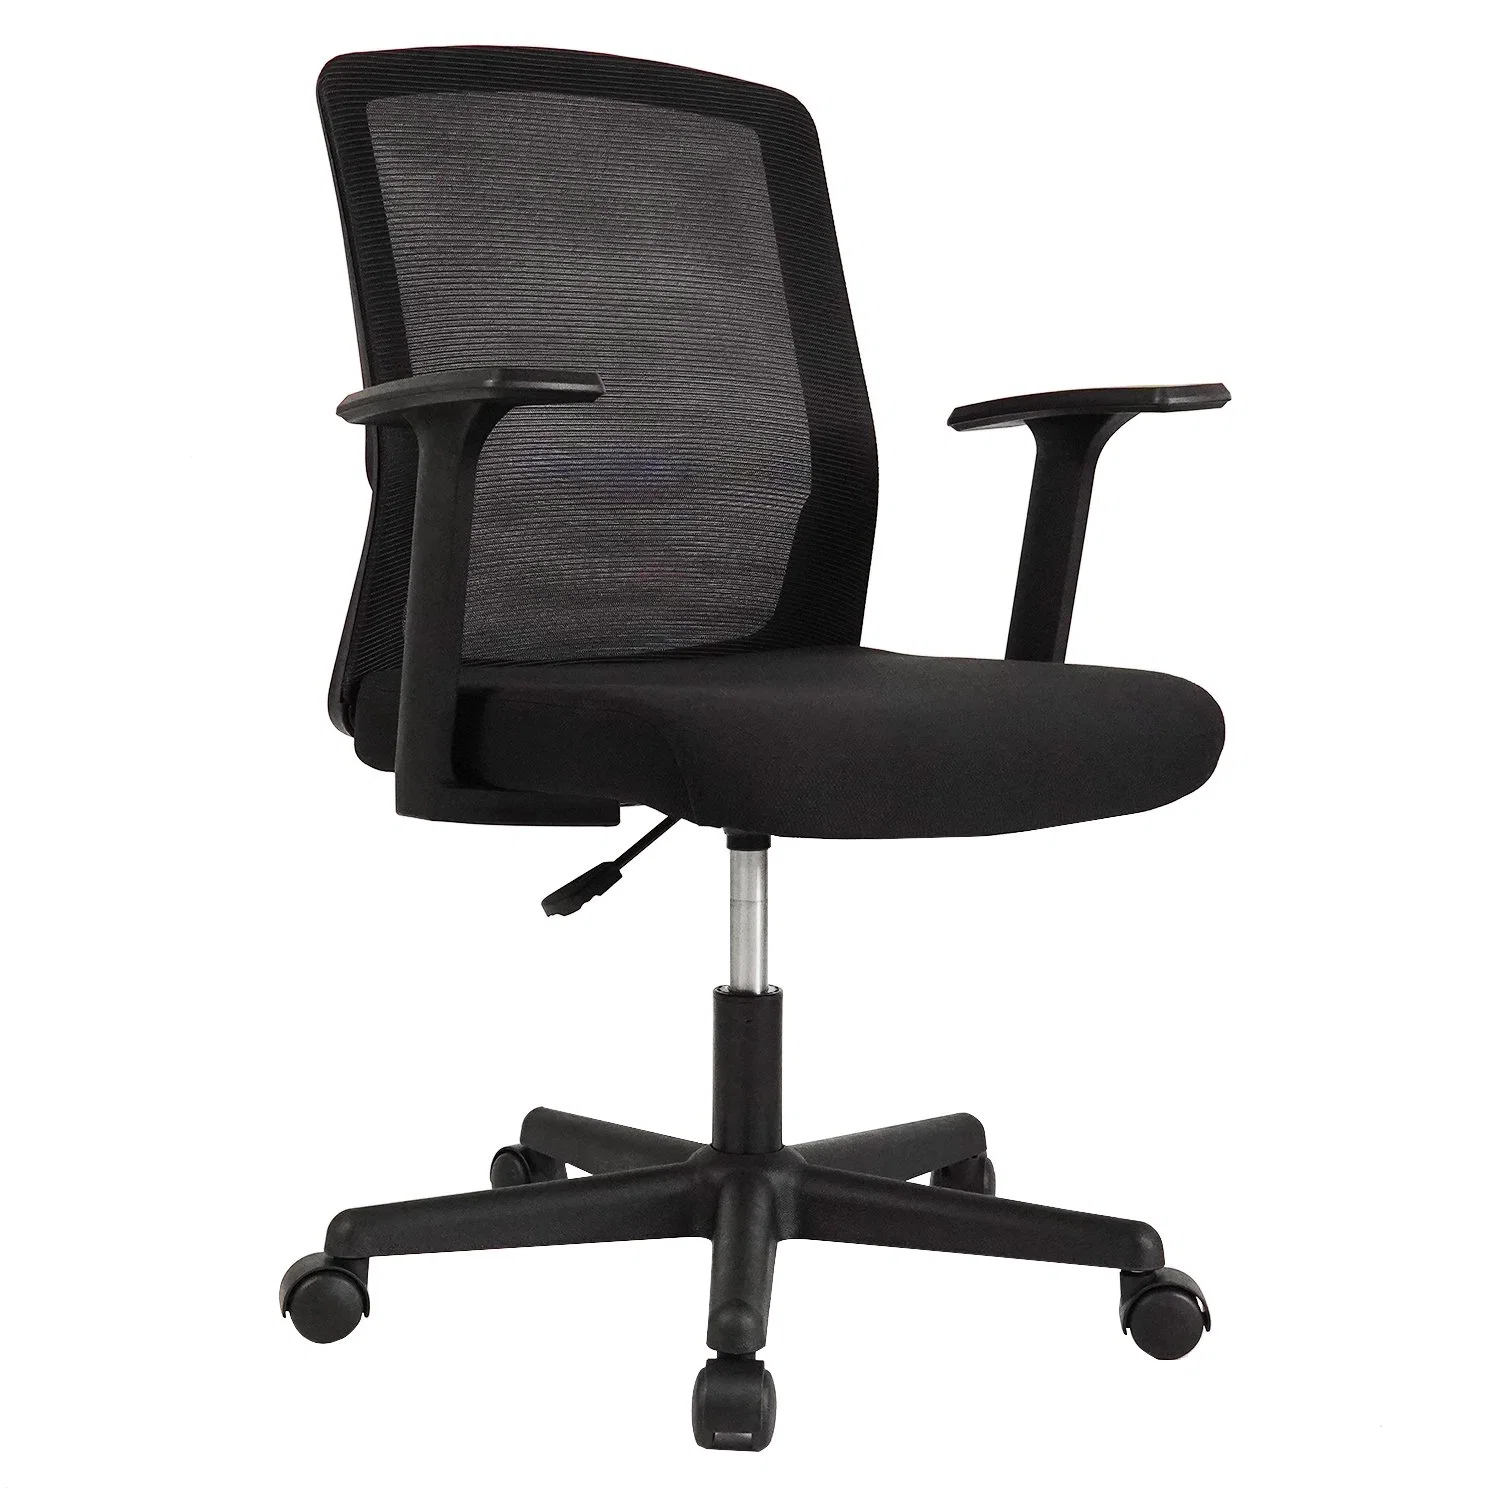 MID Back Swivel Executive for Office and Home Use Furniture Chair Small Size Popular Study Student Chair Mesh Office Chair